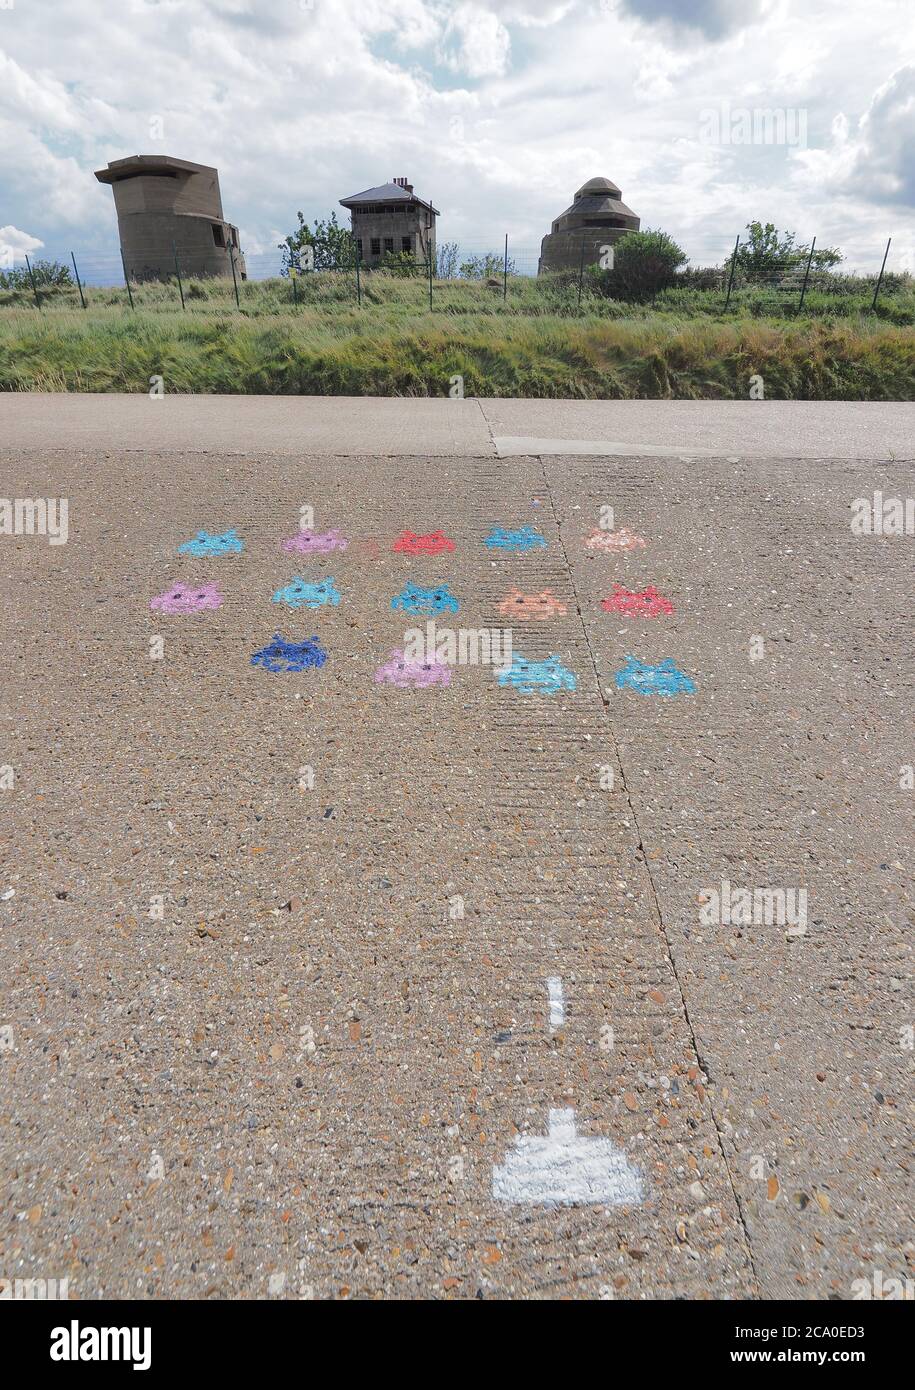 Sheerness, Kent, UK. 3rd August, 2020. A depiction of classic late '70's / 1980s computer game 'Space Invaders' has appeared on the sea wall at Sheerness, Kent in front of three old defensive gun towers. Credit: James Bell/Alamy Live News Stock Photo